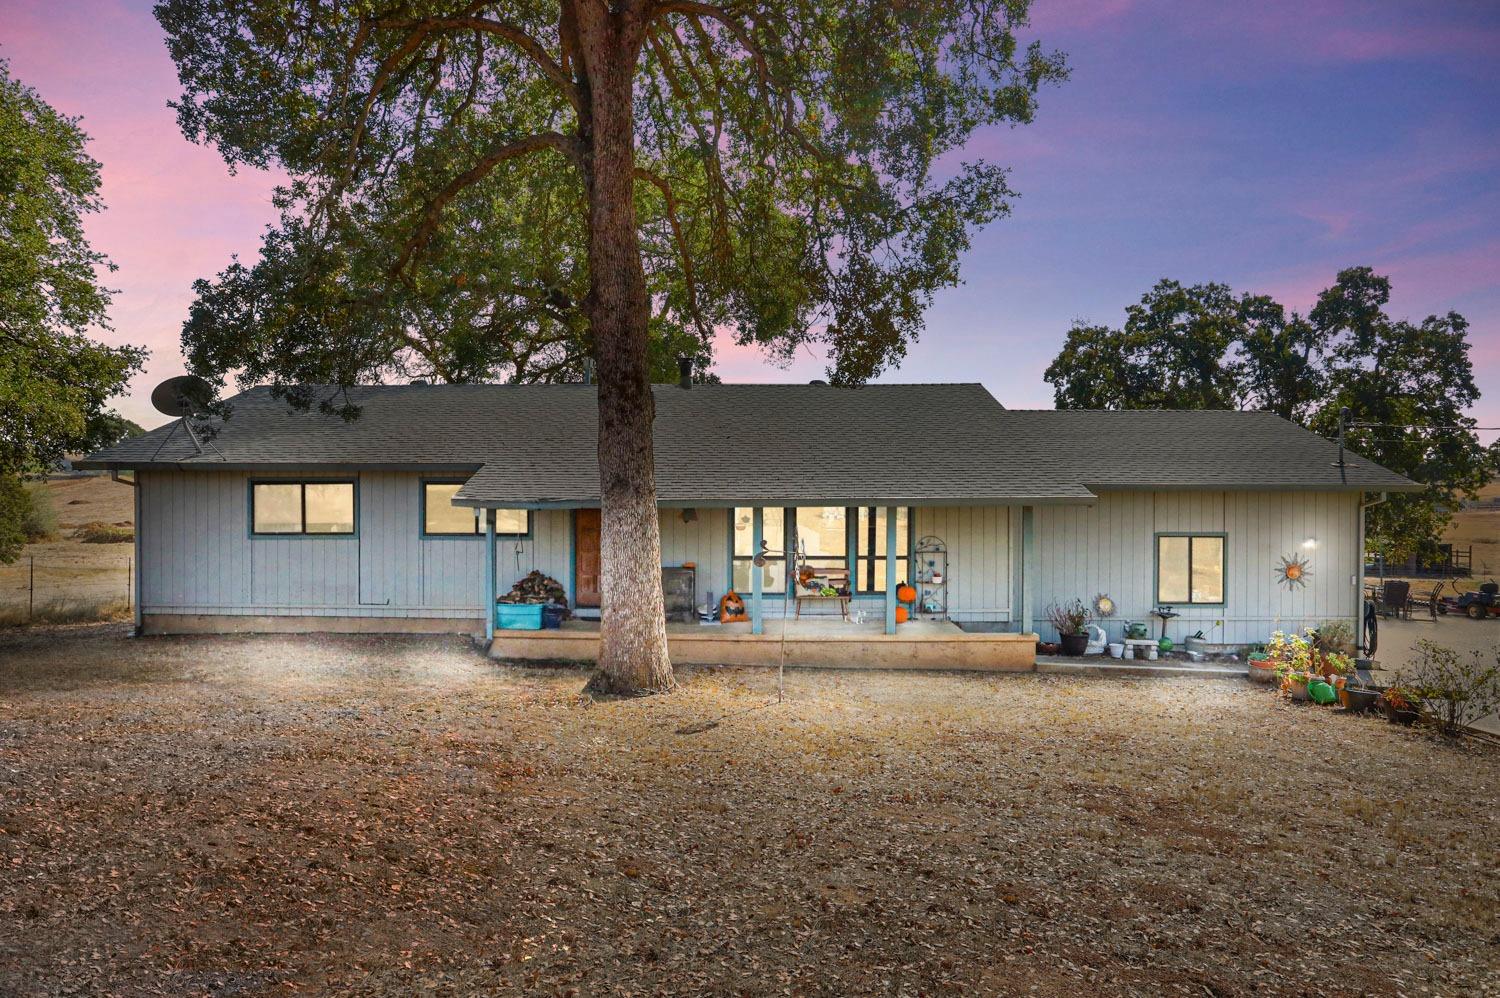 Photo of 5200 Asta Ct in Plymouth, CA